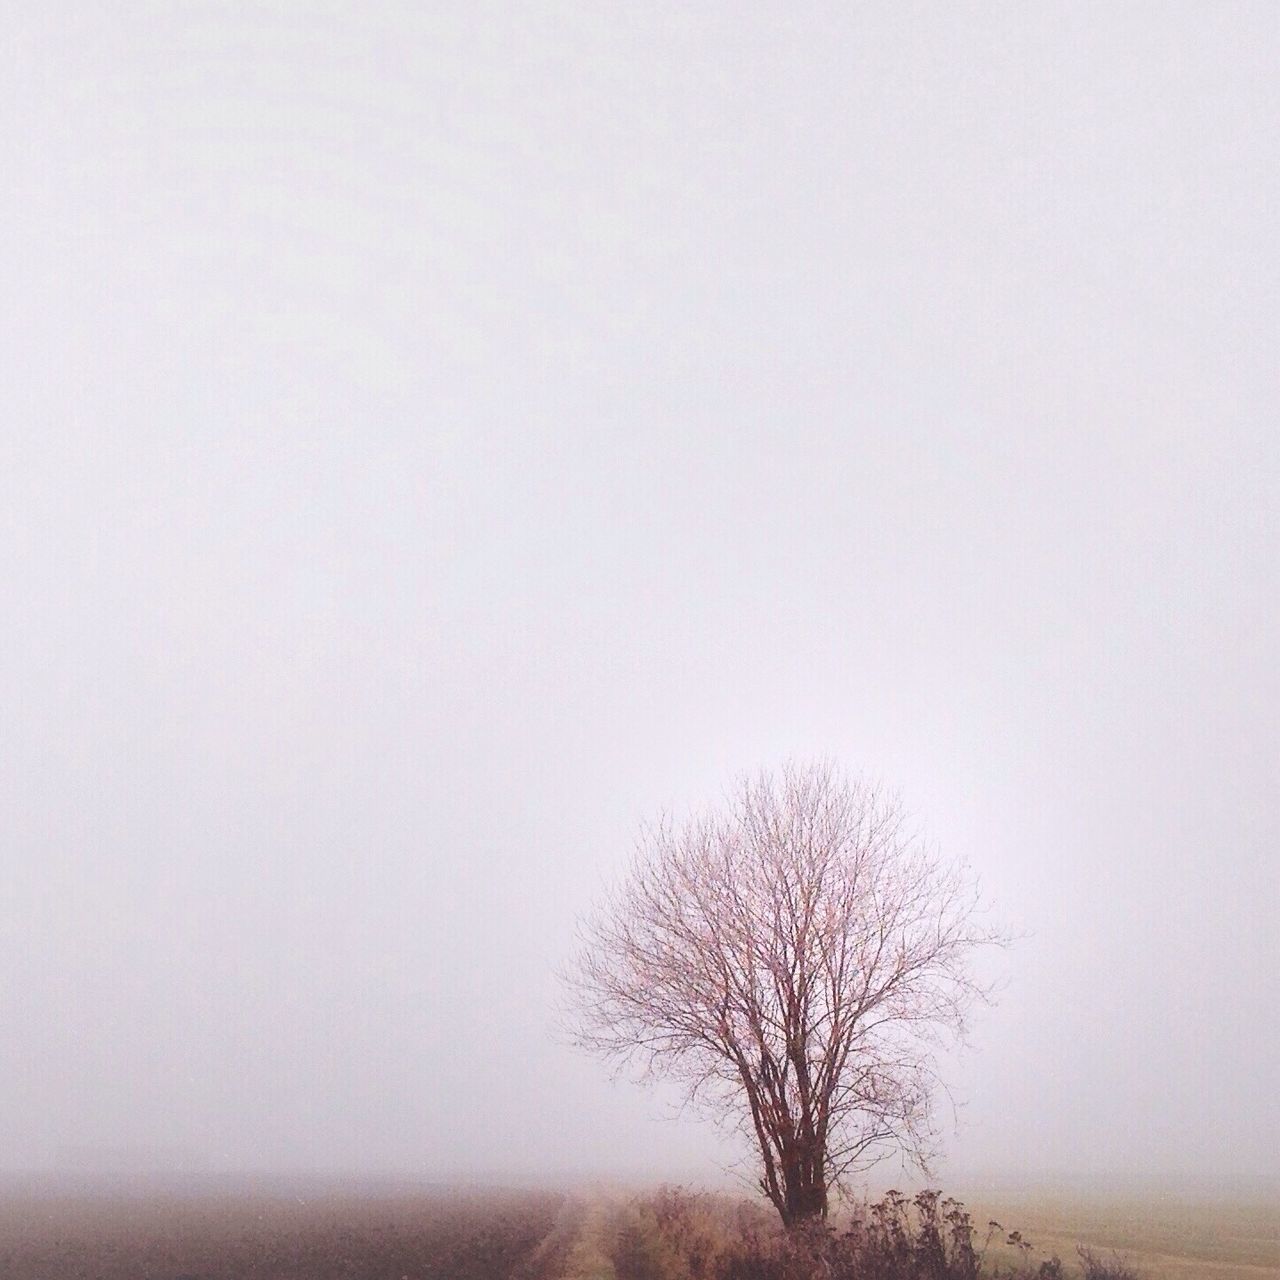 clear sky, tranquility, tranquil scene, copy space, tree, bare tree, scenics, beauty in nature, foggy, nature, landscape, weather, branch, non-urban scene, field, idyllic, silhouette, remote, outdoors